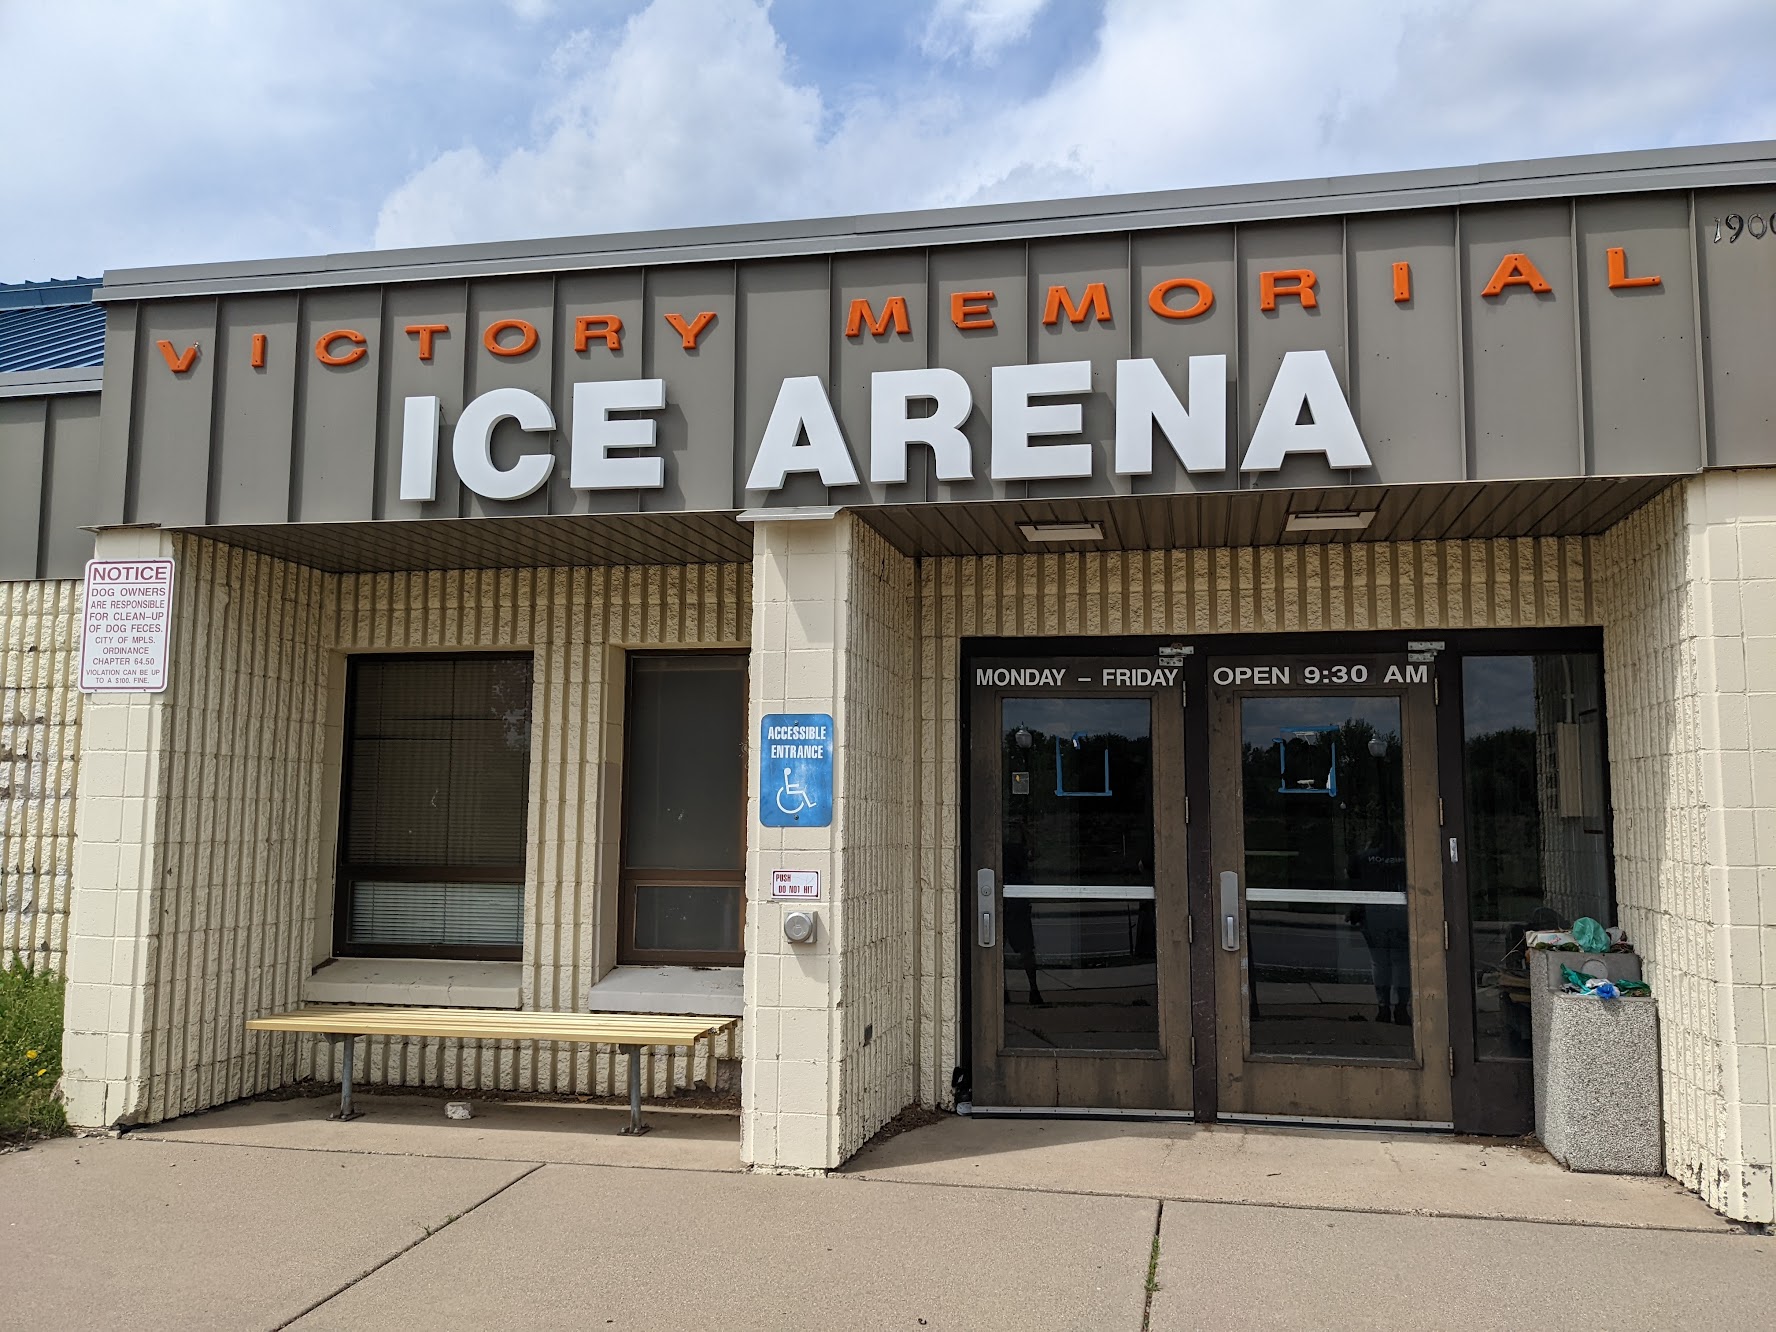 An exterior shot of victory memorial ice arena's white and orange sign